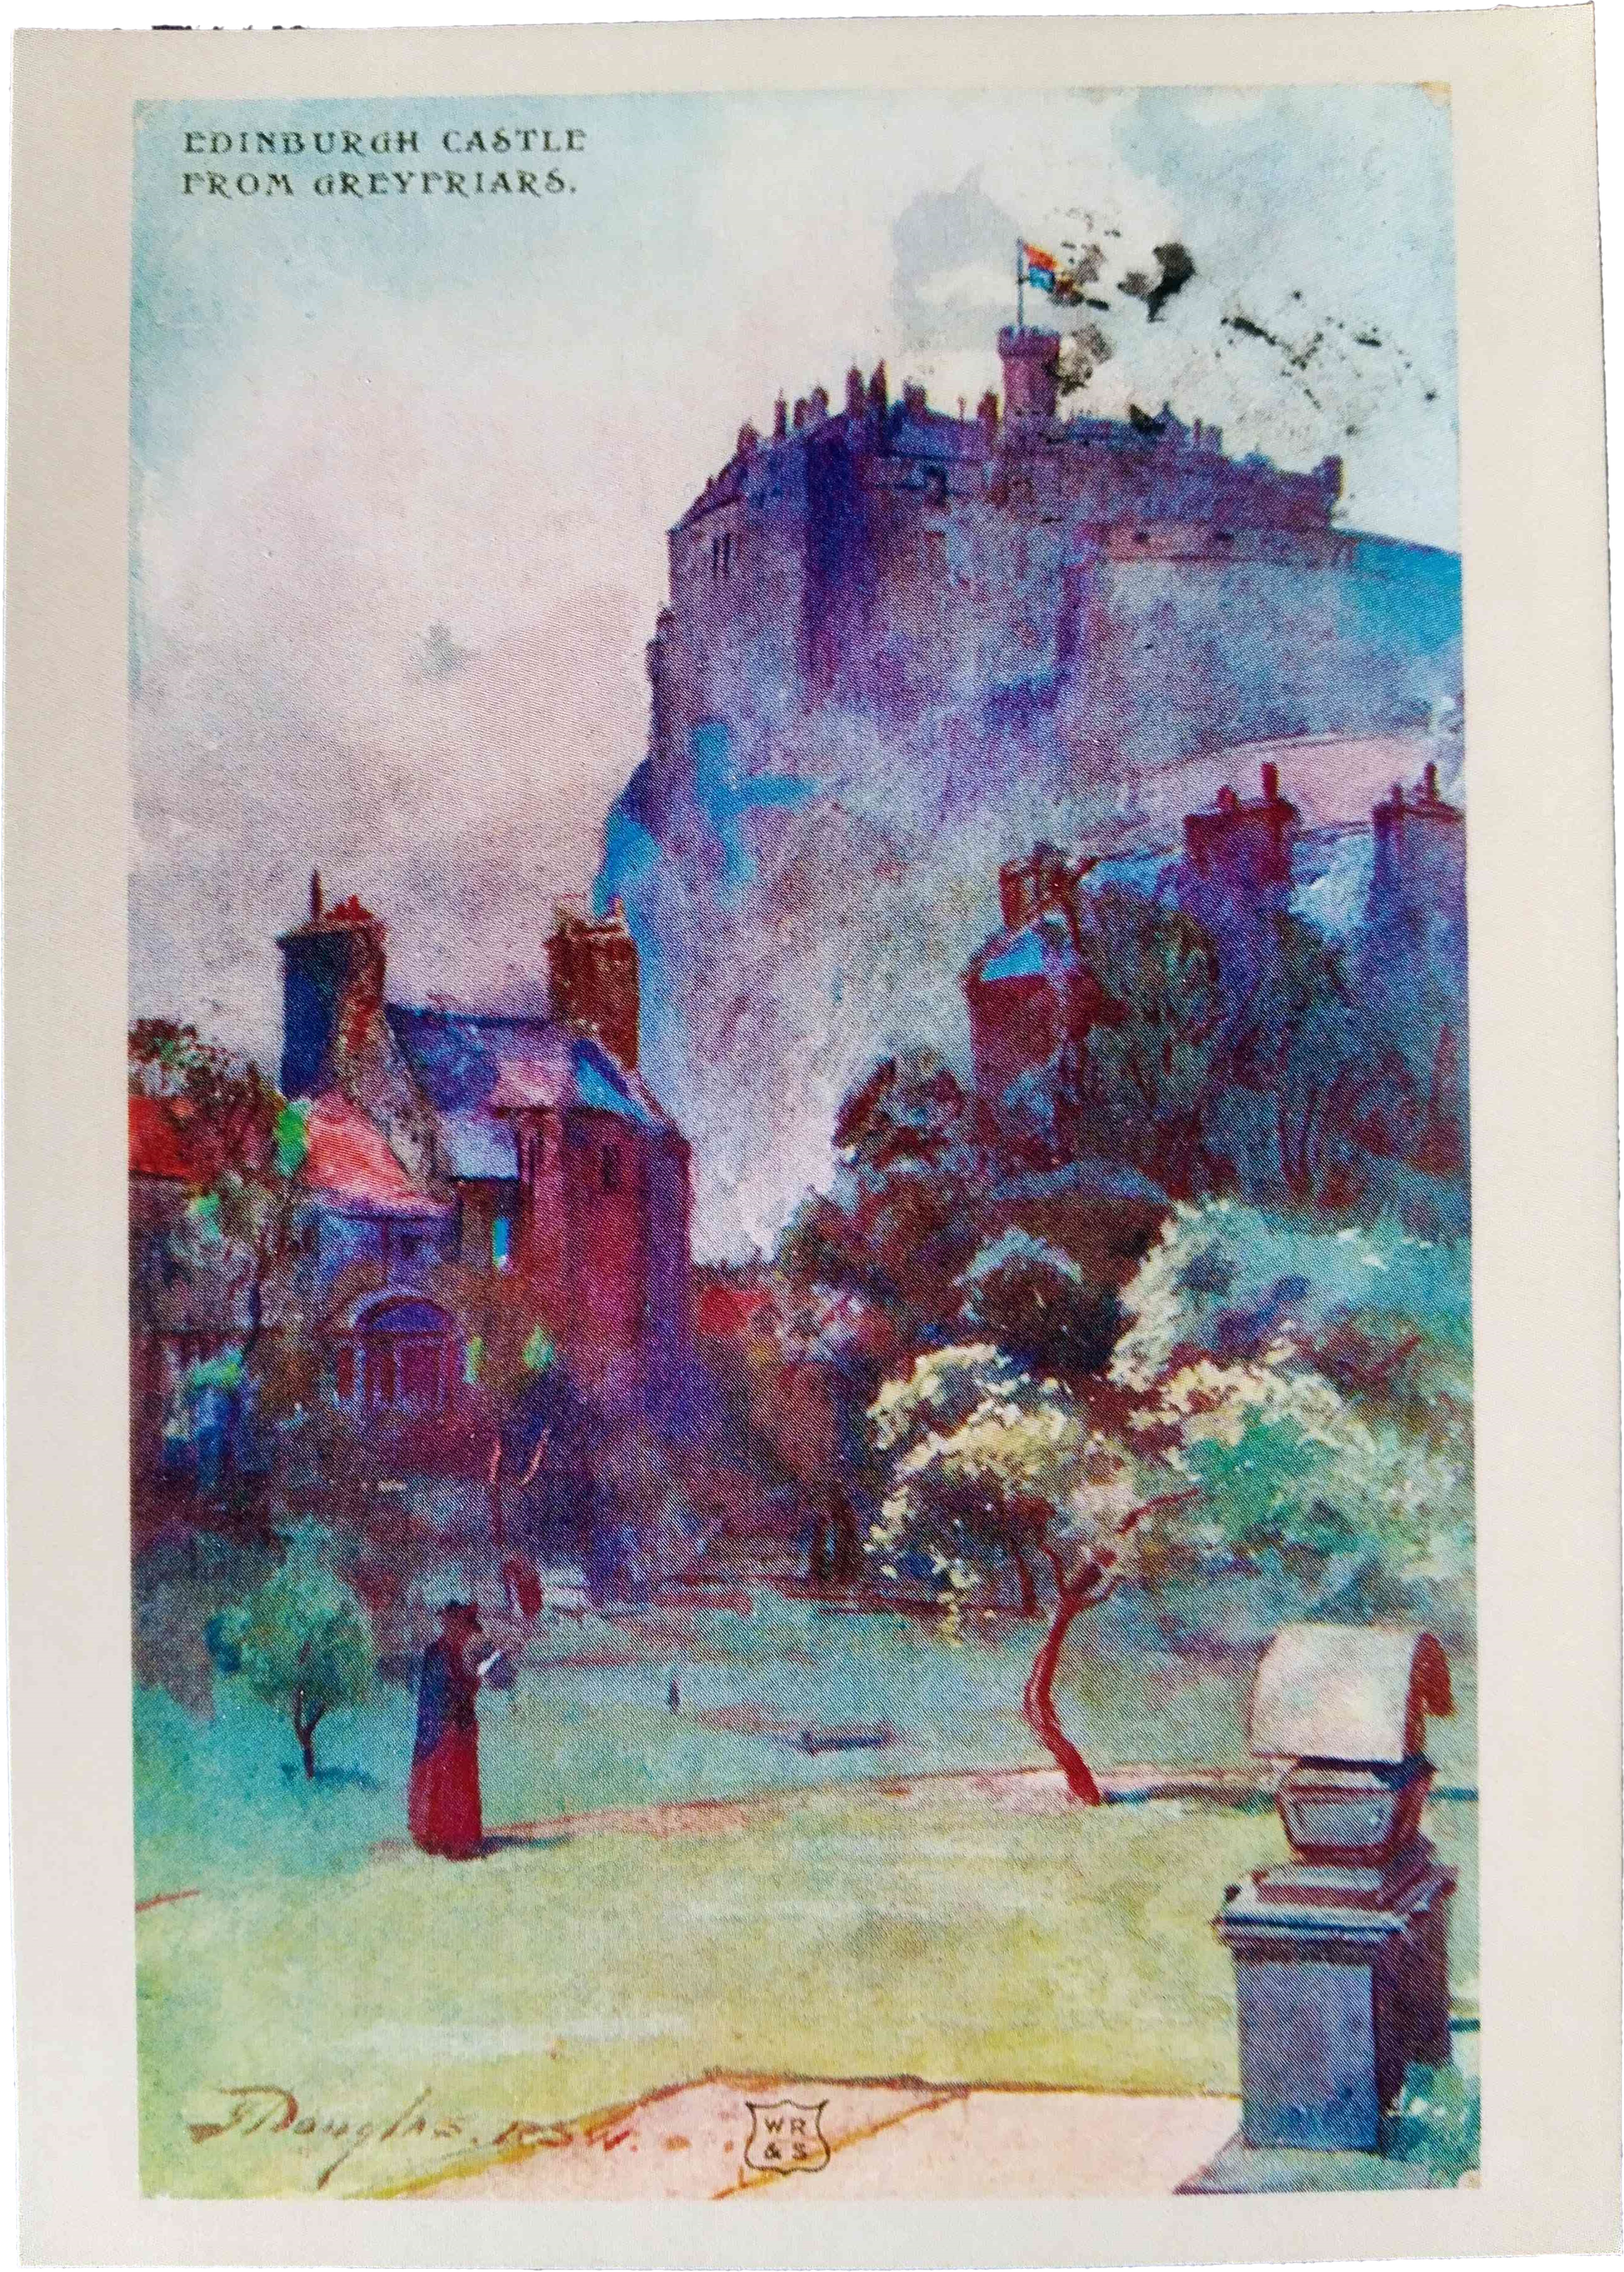 A painting of a church graveyard with a castle looming above it with the caption 'Edinburgh Castle from Greyfriars'